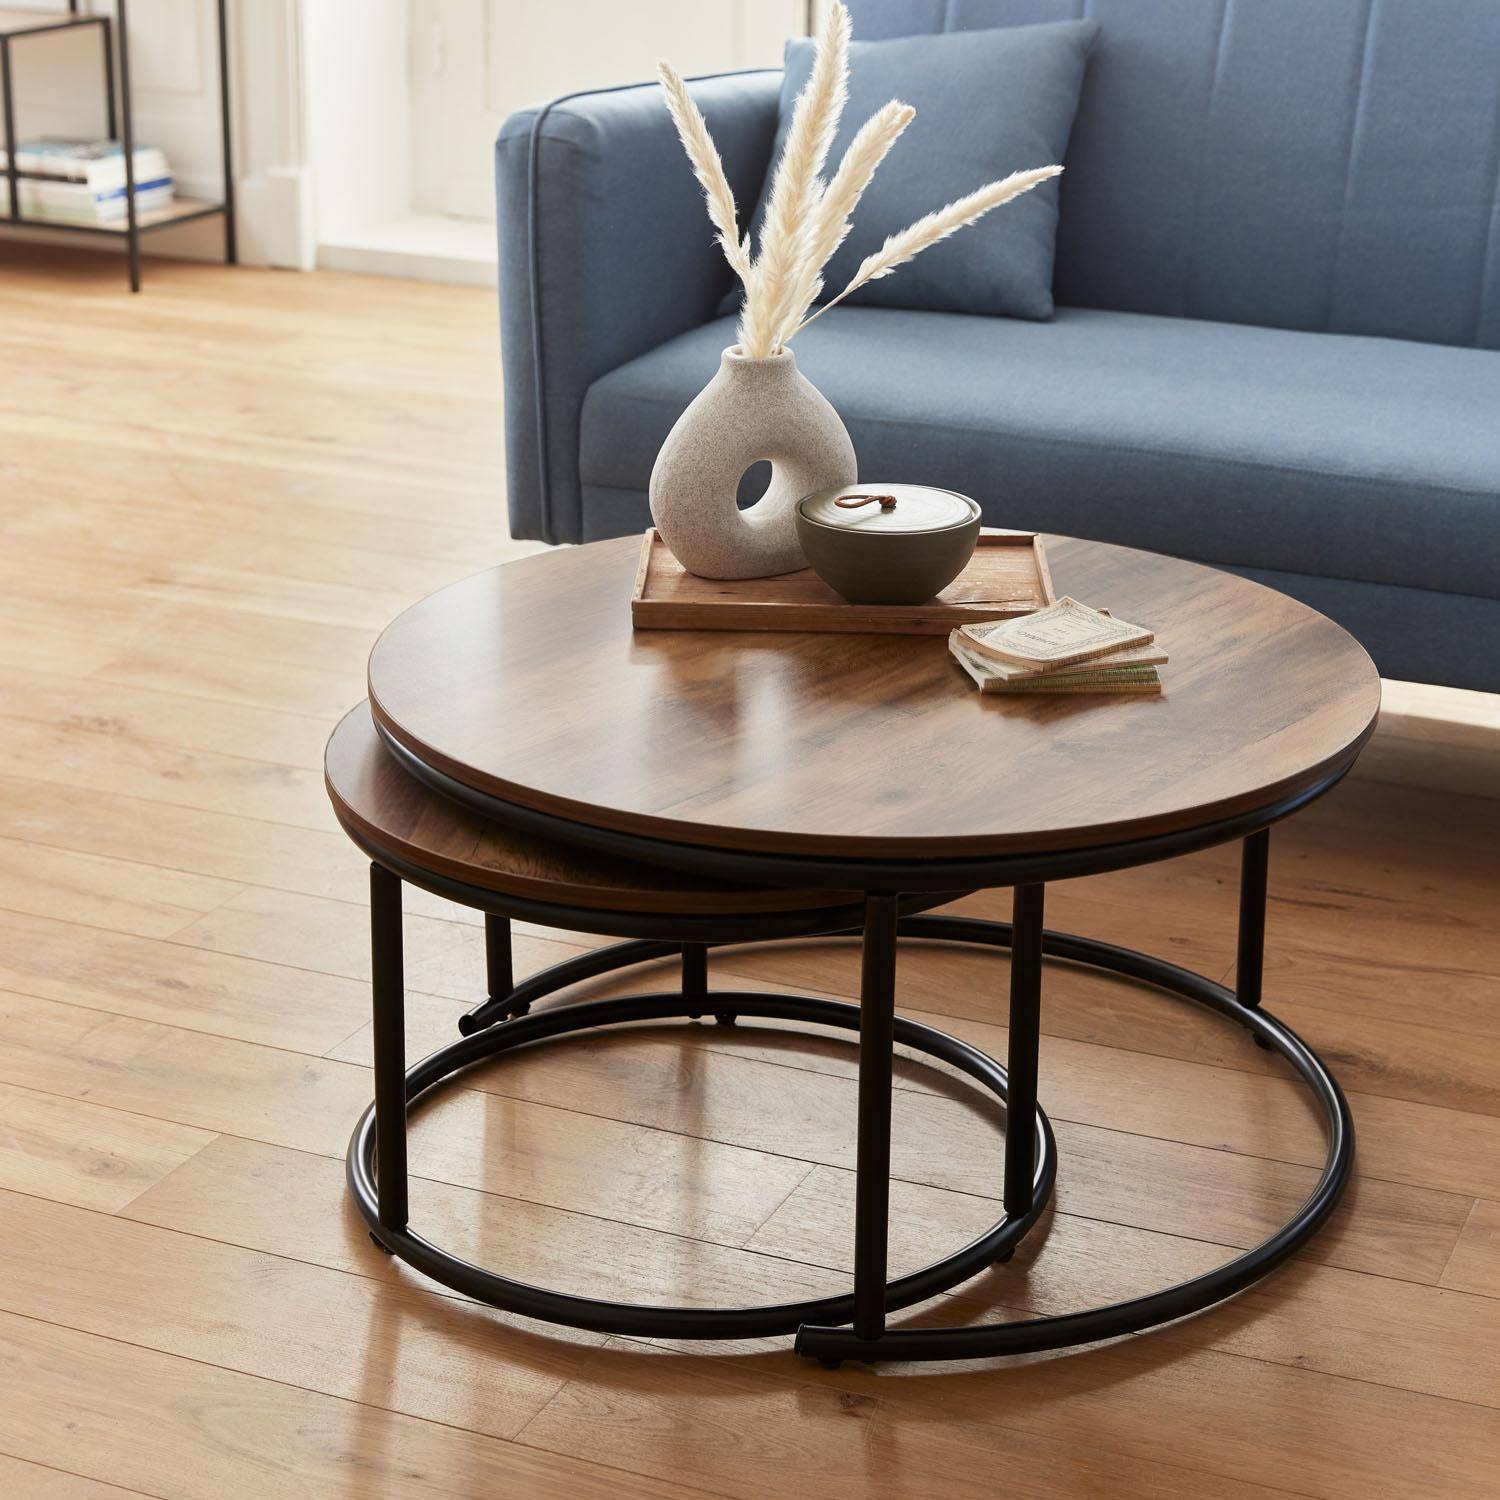 Pair of round, metal and wood-effect nesting coffee tables, 77x40x57cm - Loft Photo3